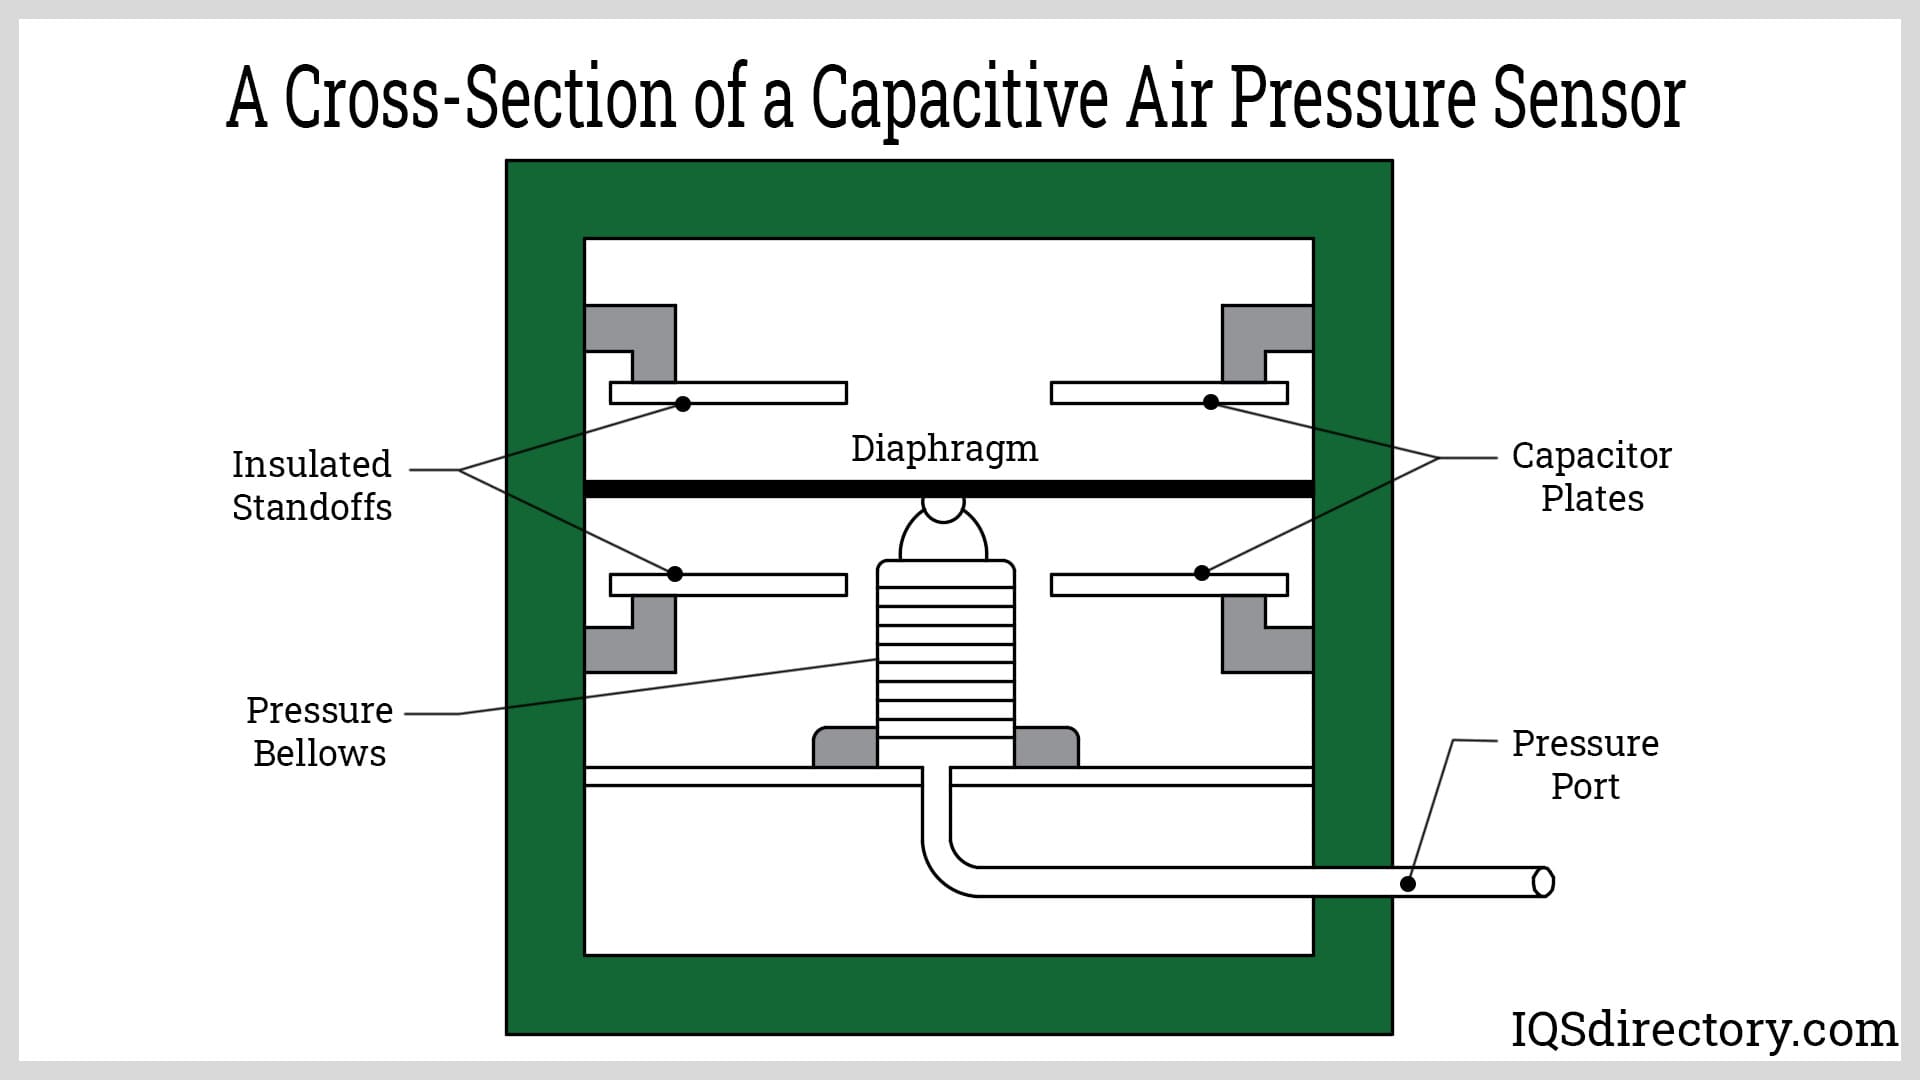 A Cross-Section of a Capacitive Air Pressure Sensor